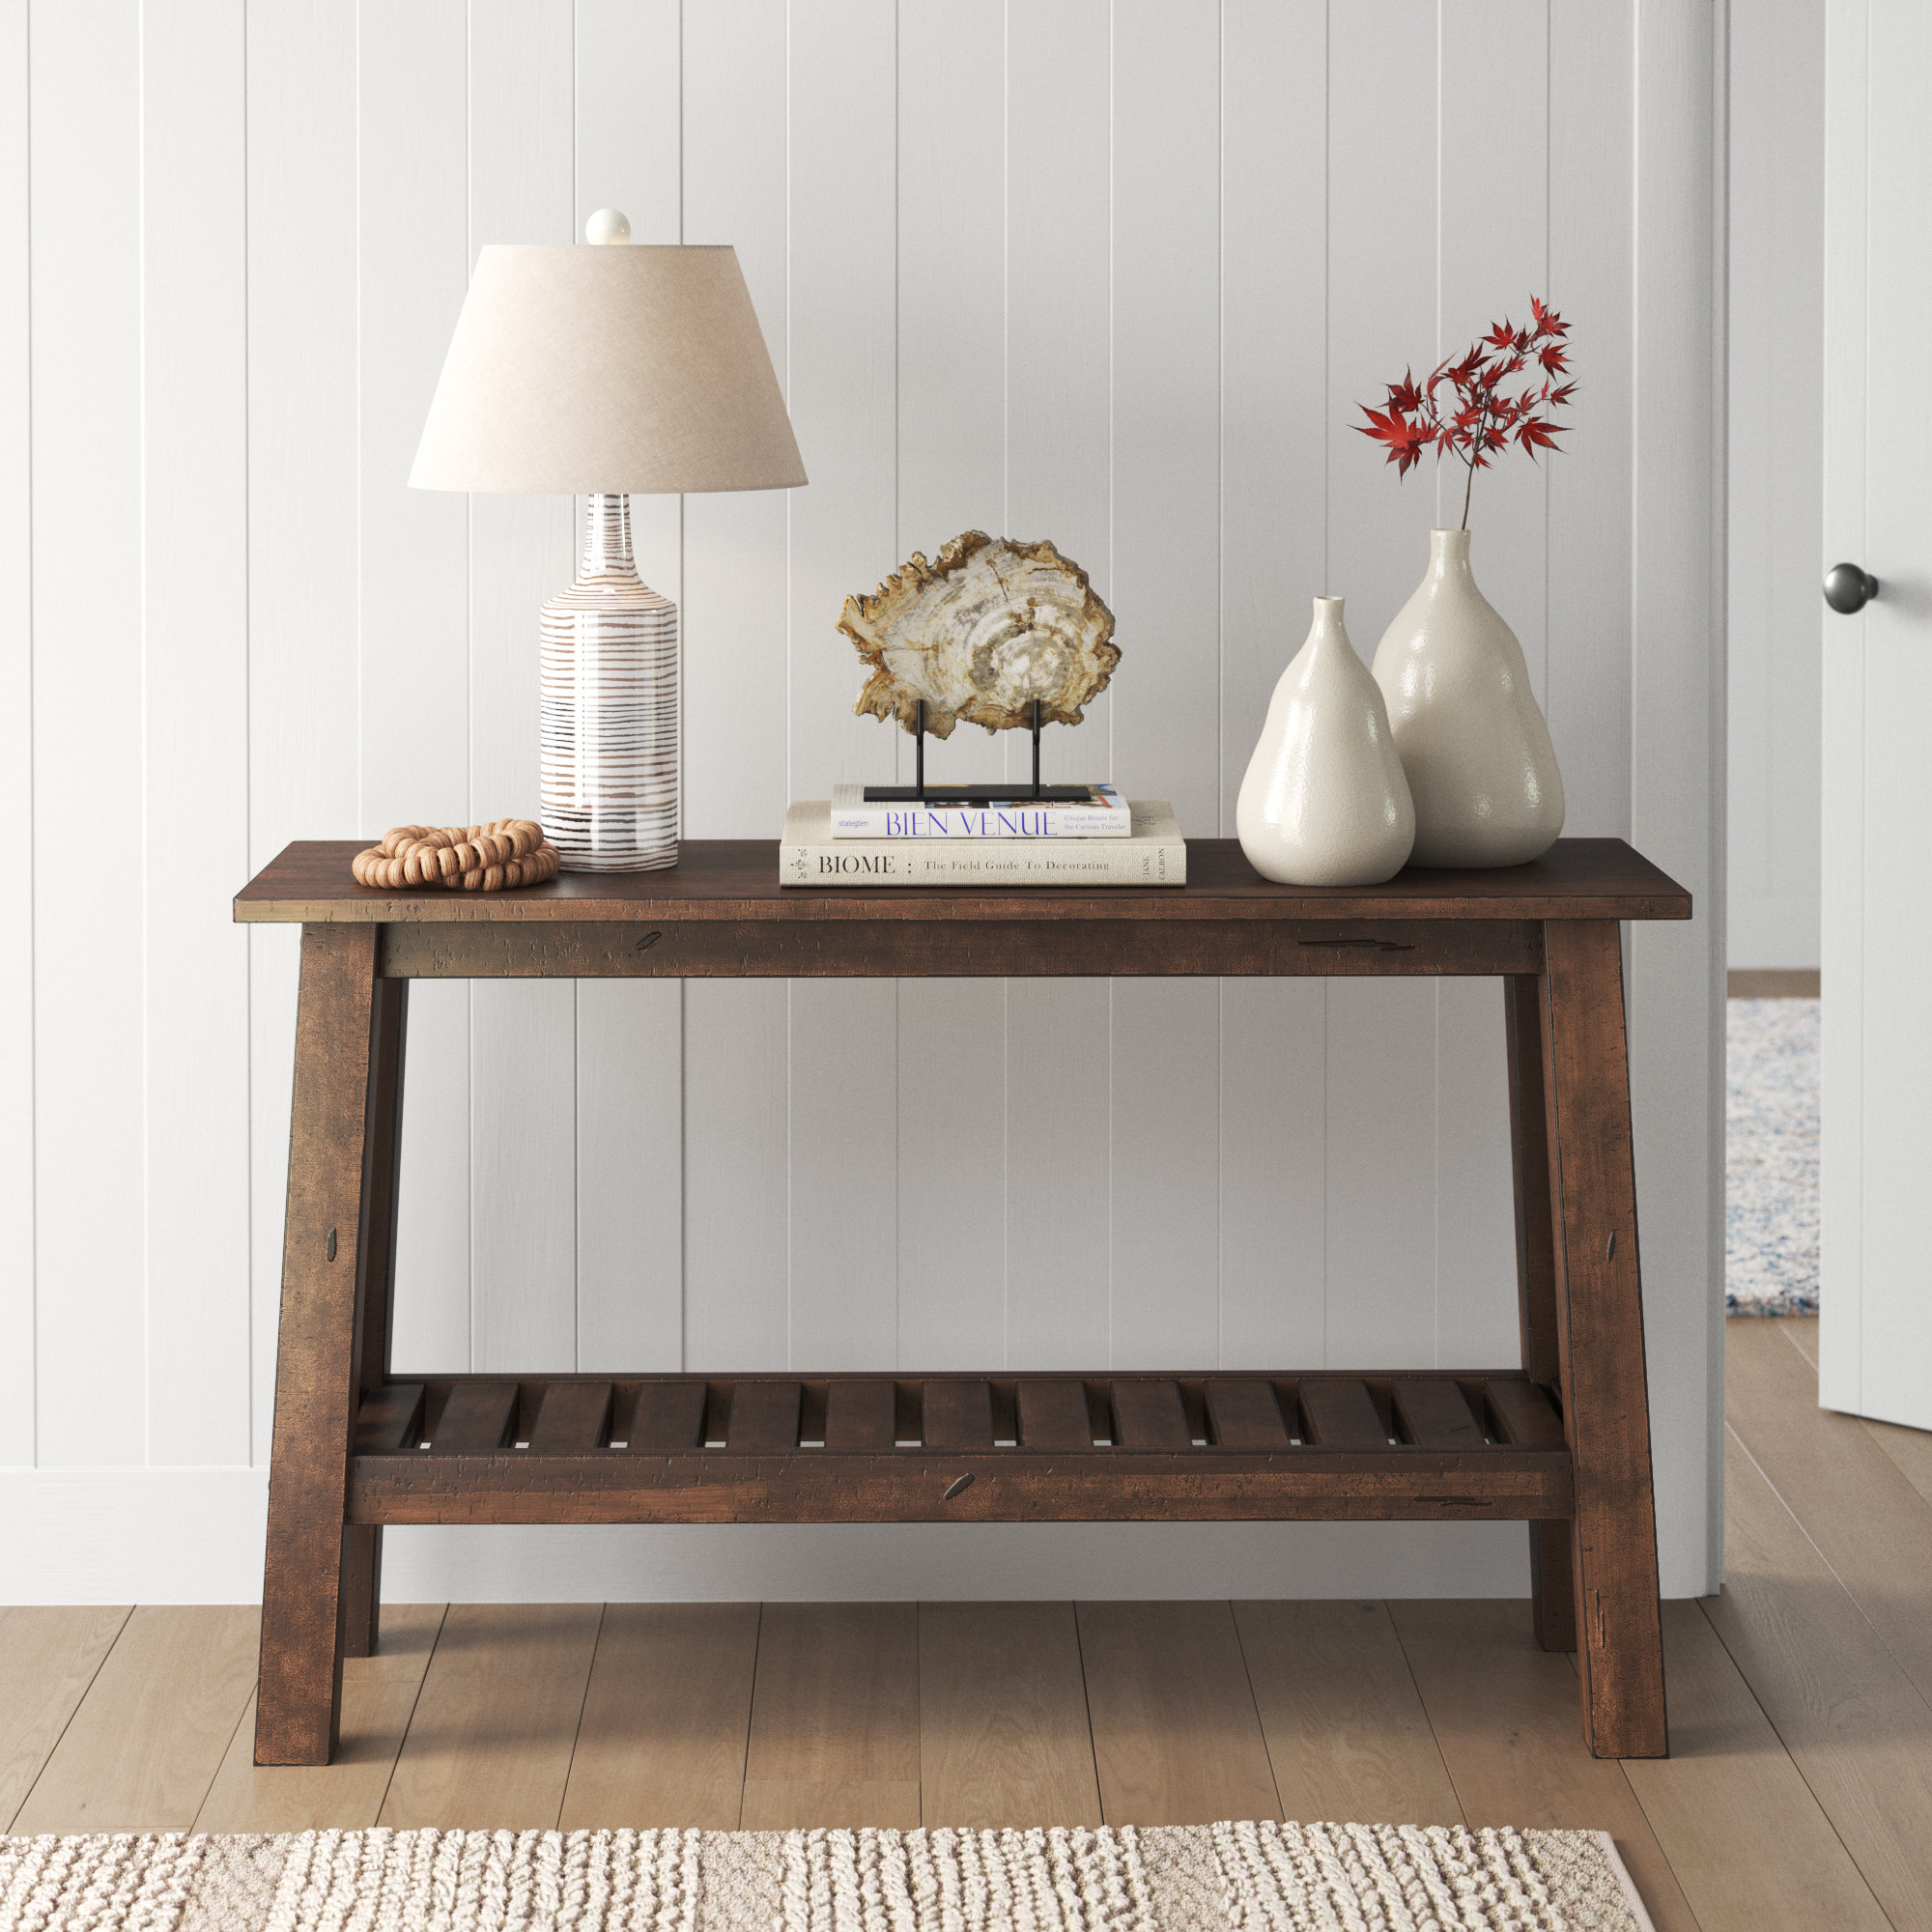 Simple Console Table Styling + New Vintage Inspired Runner